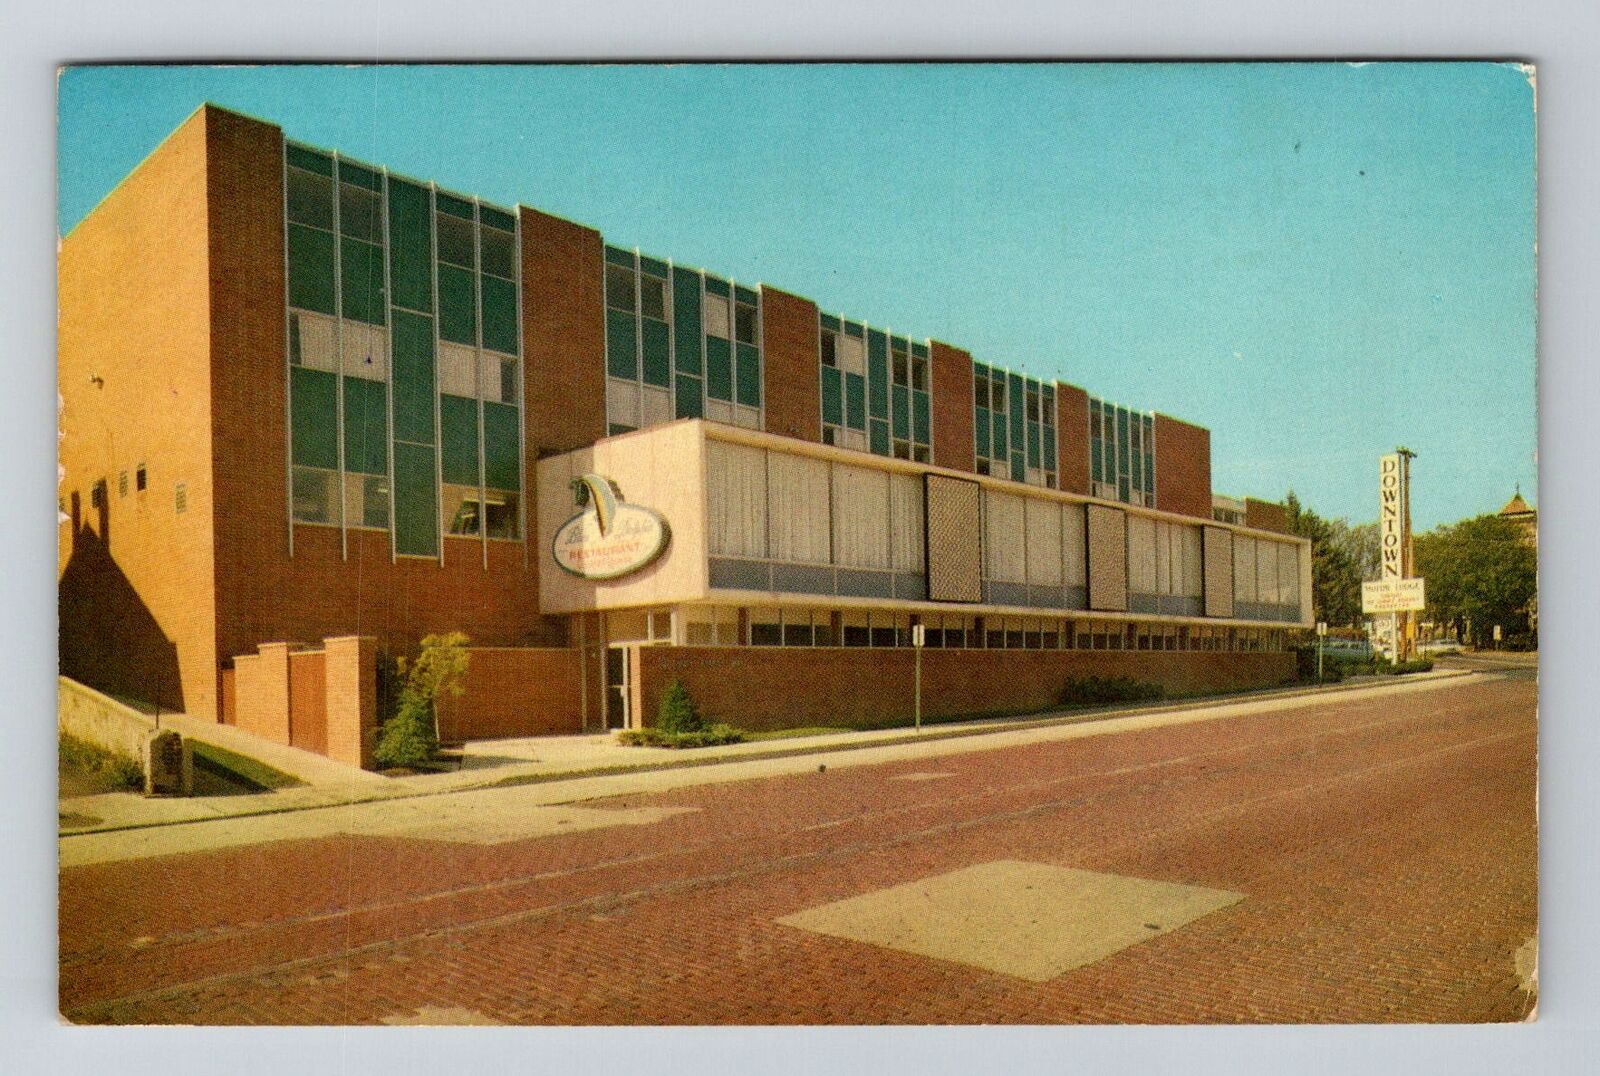 Mansfield OH-Ohio, Downtown Motor Lodge, Advertising,  c1968 Vintage Postcard